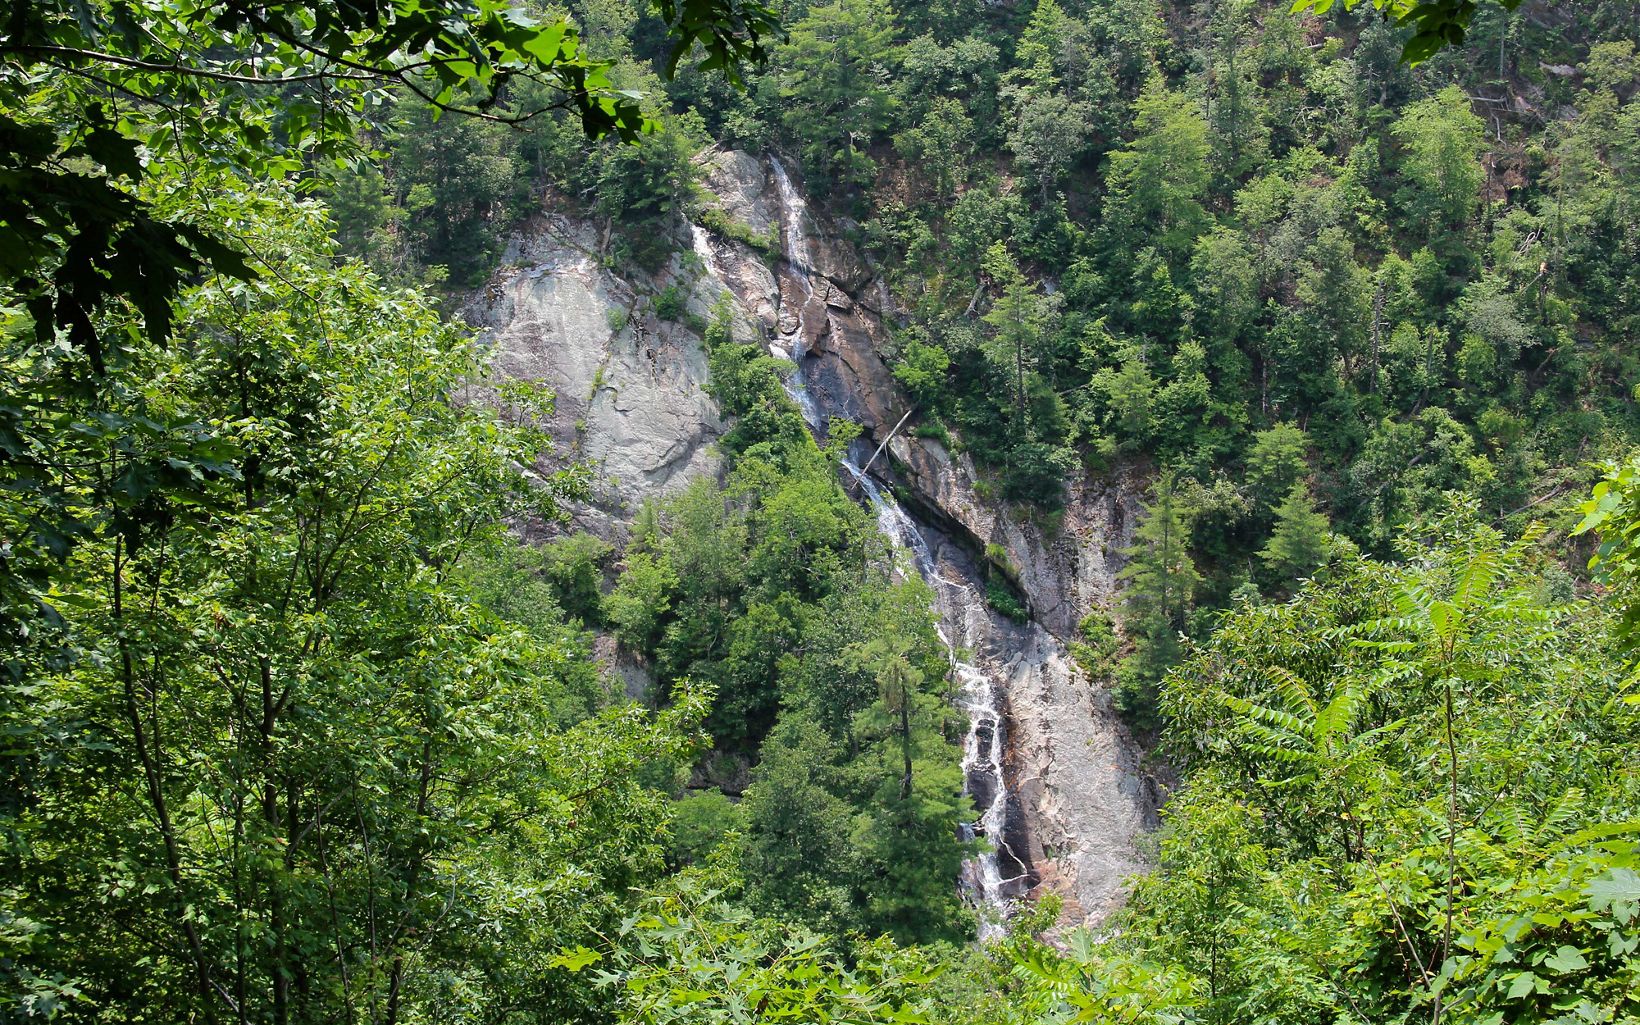 Bottom Creek Gorge One of the head-water streams of the South Fork of the Roanoke River, Bottom Creek boasts a 200-foot high waterfall.  © Glenna Goldman / TNC